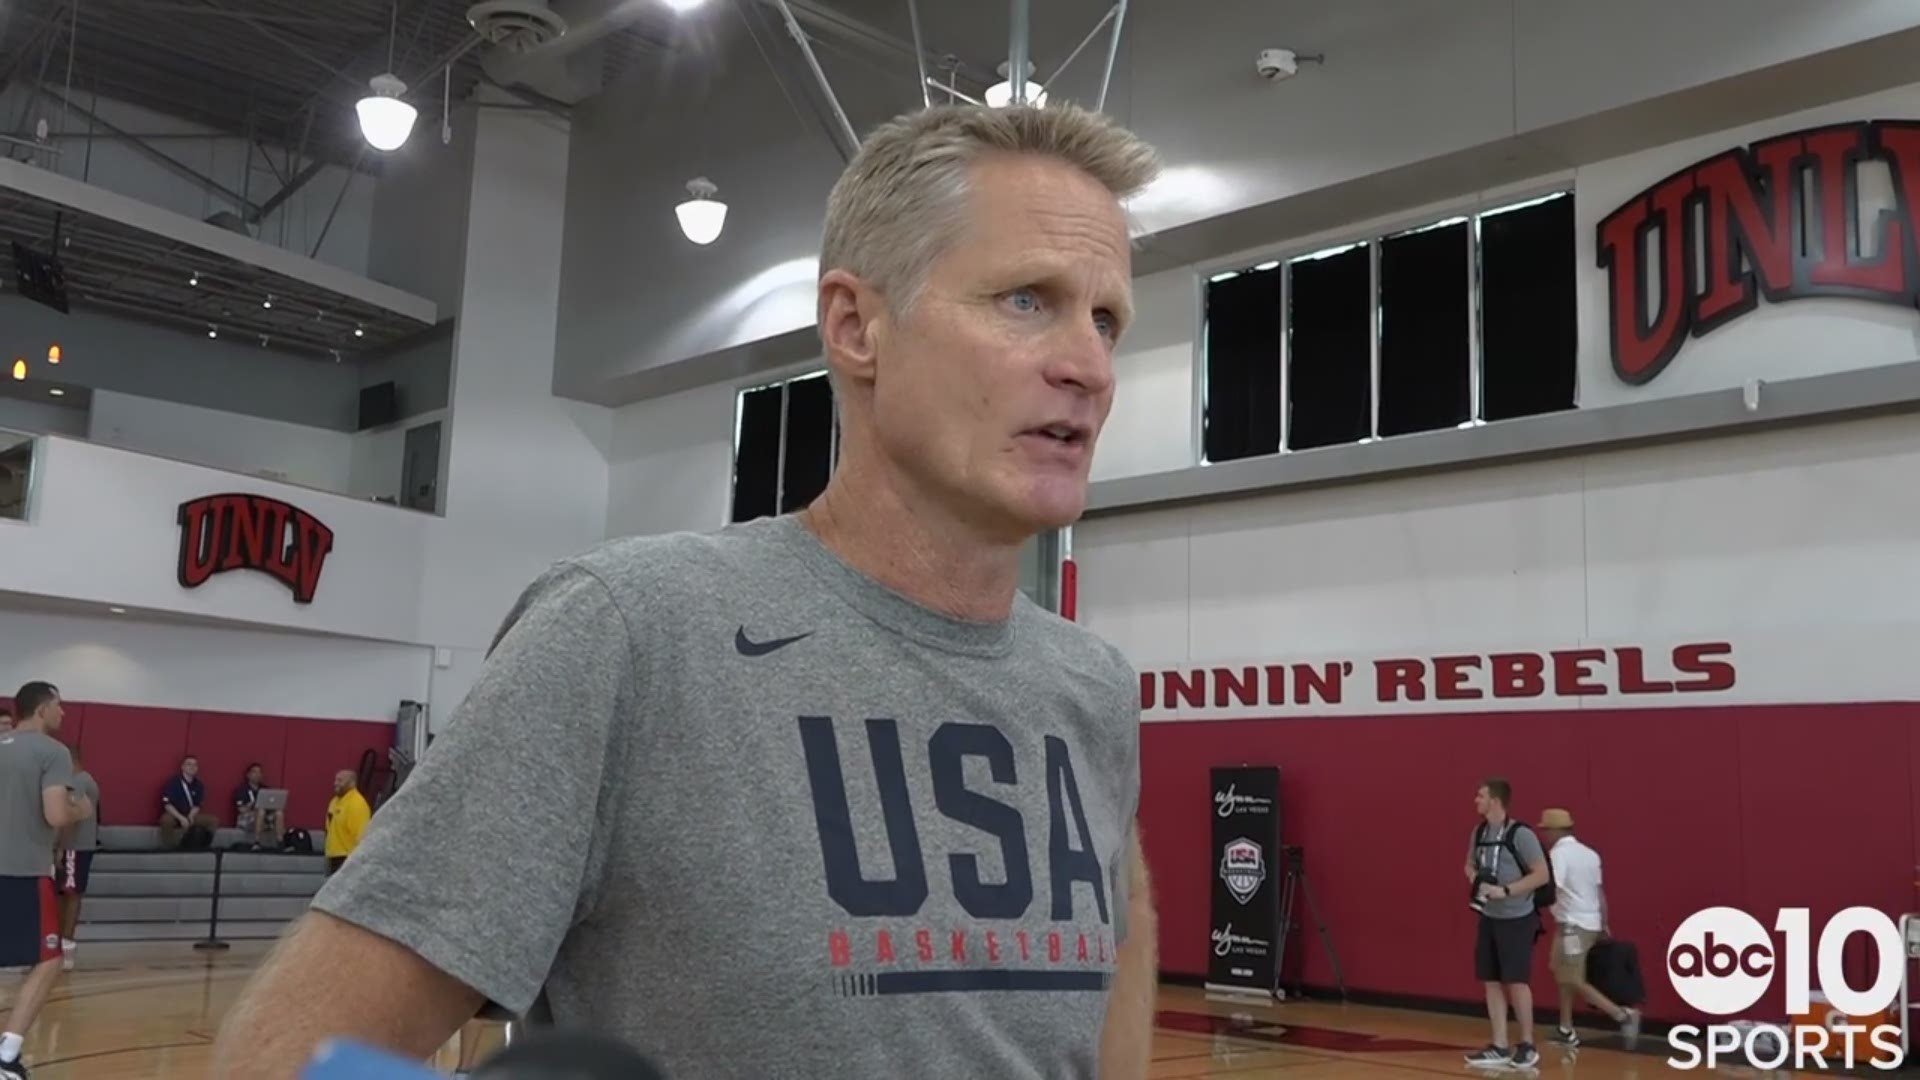 Golden State Warriors head coach Steve Kerr, who serves as an assistant coach for USA Basketball, talks about Kings players De'Aaron Fox and Harrison Barnes, and also has strong words for Senate Majority Leader Mitch McConnell and President Donald Trump following last week's mass shootings.